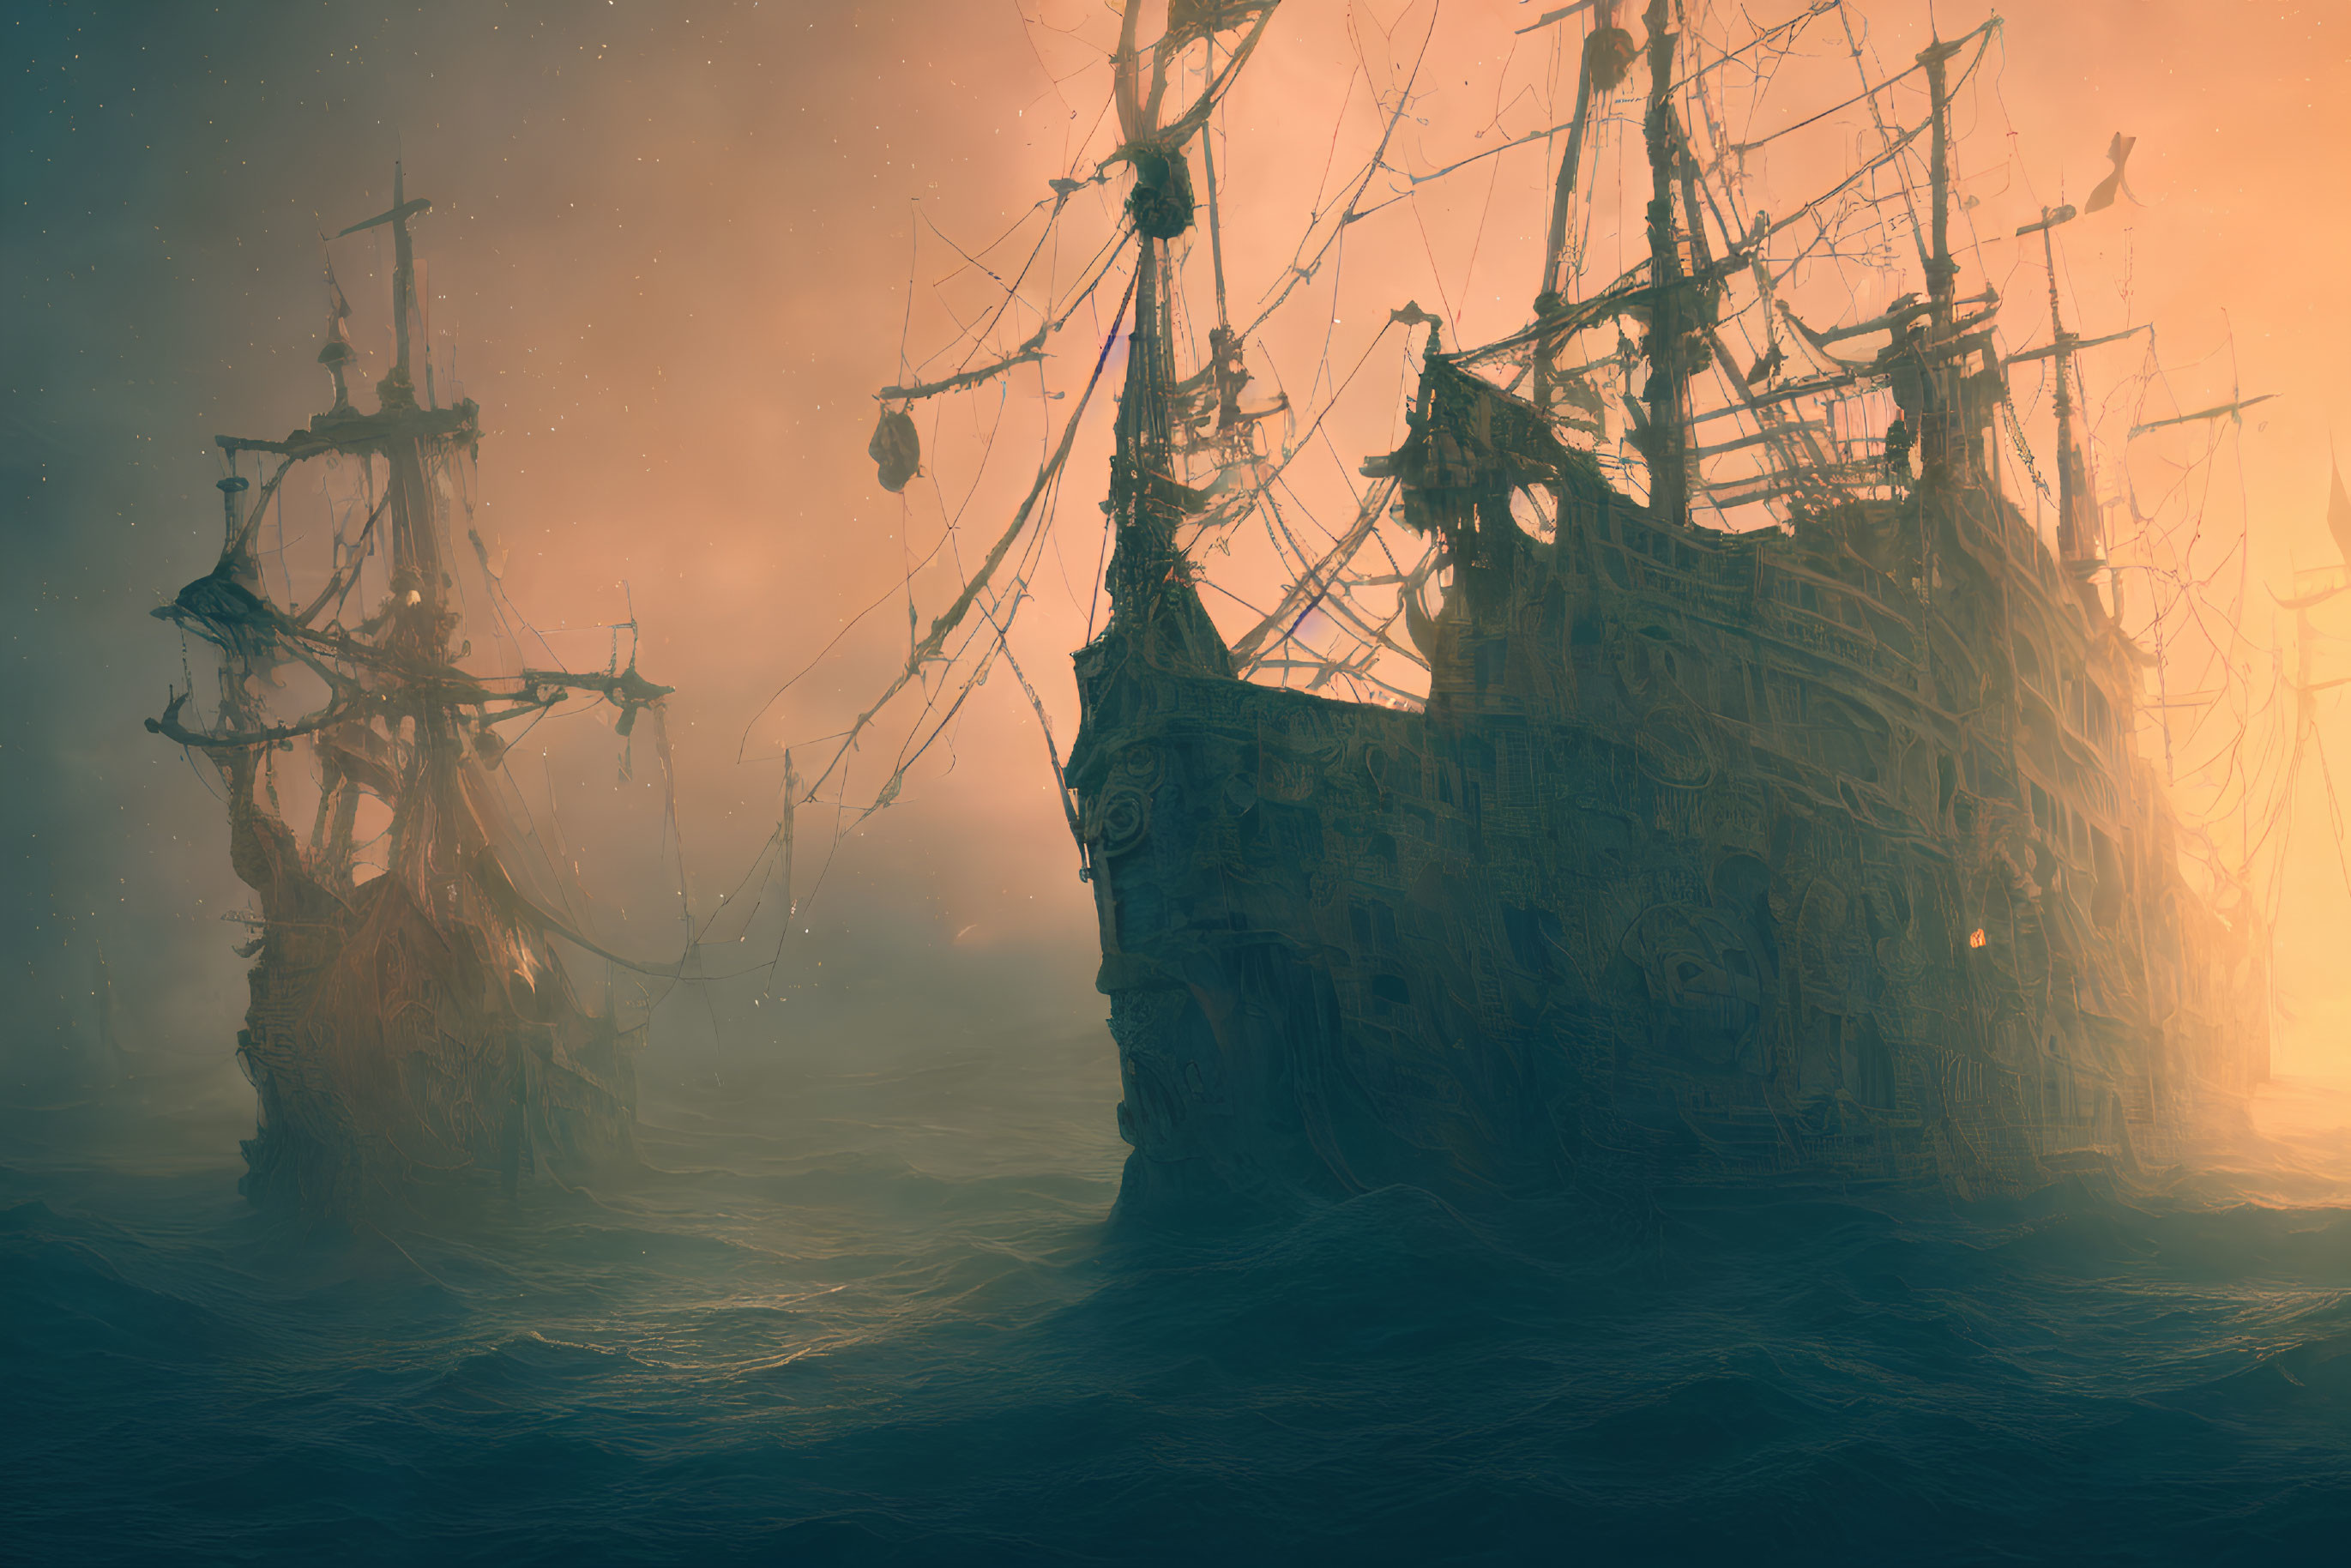 Ghostly pirate ships with tattered sails in foggy, amber sea